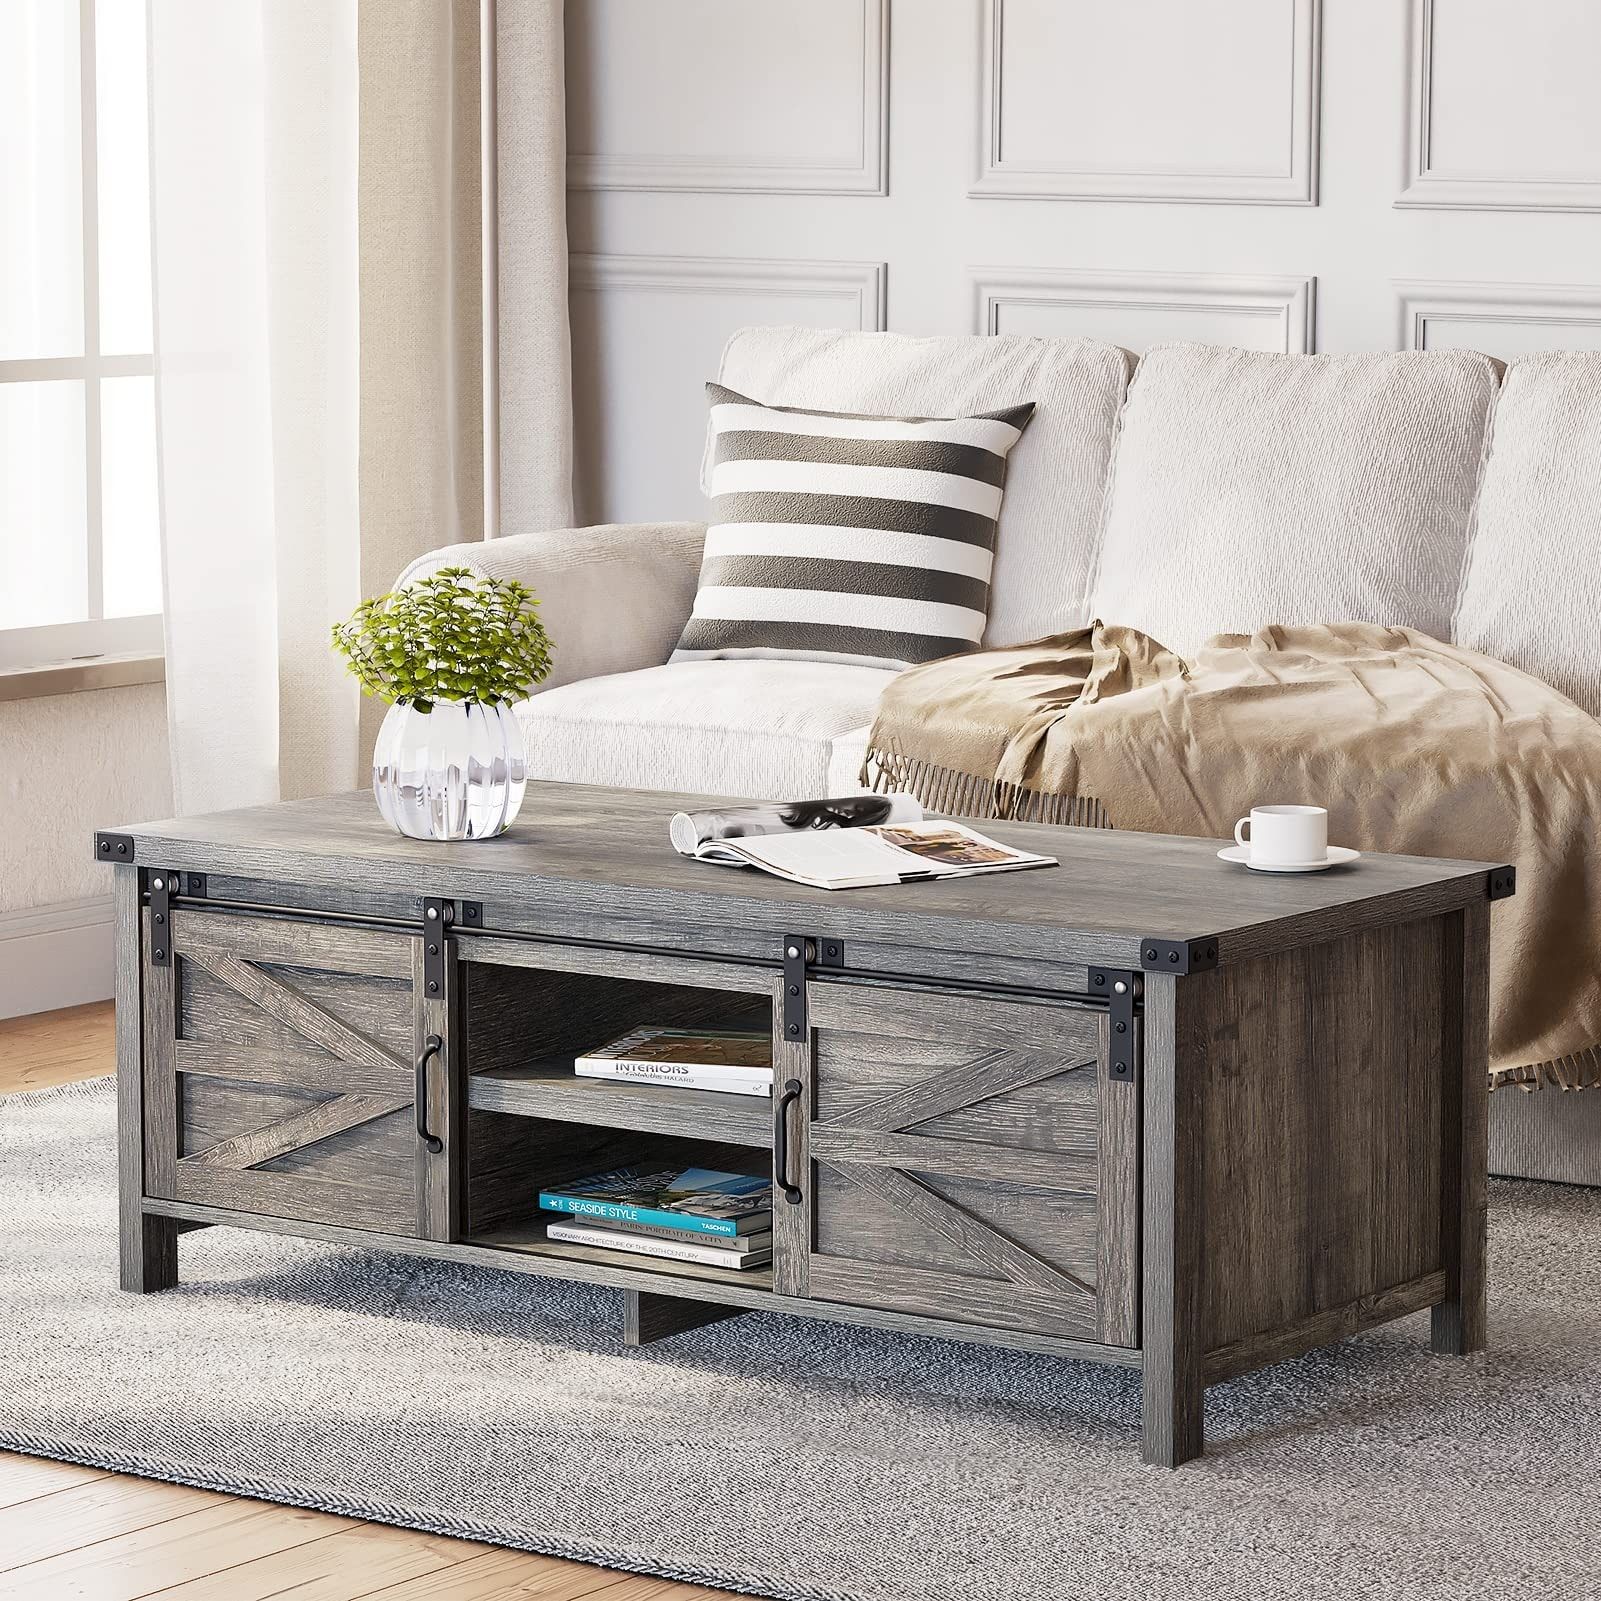 Farmhouse Coffee Table With Sliding Barn Doors & Storage, Grey Rustic  Wooden Center Rectangular Tables – Bed Bath & Beyond – 37841722 Pertaining To Coffee Tables With Storage And Barn Doors (View 2 of 15)